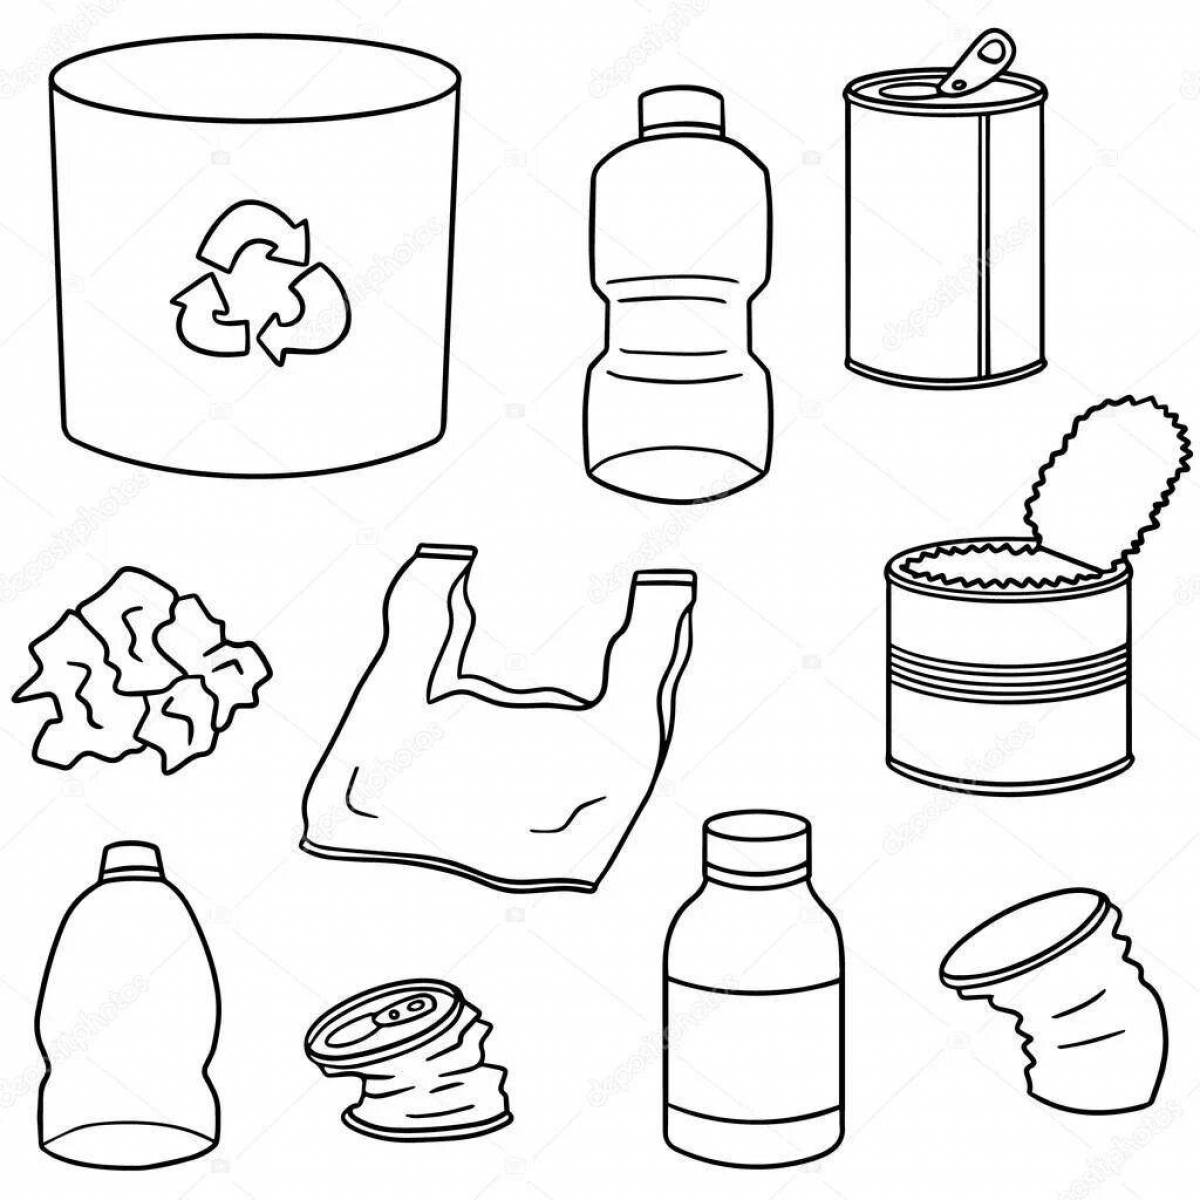 Coloring book on sorting waste for children